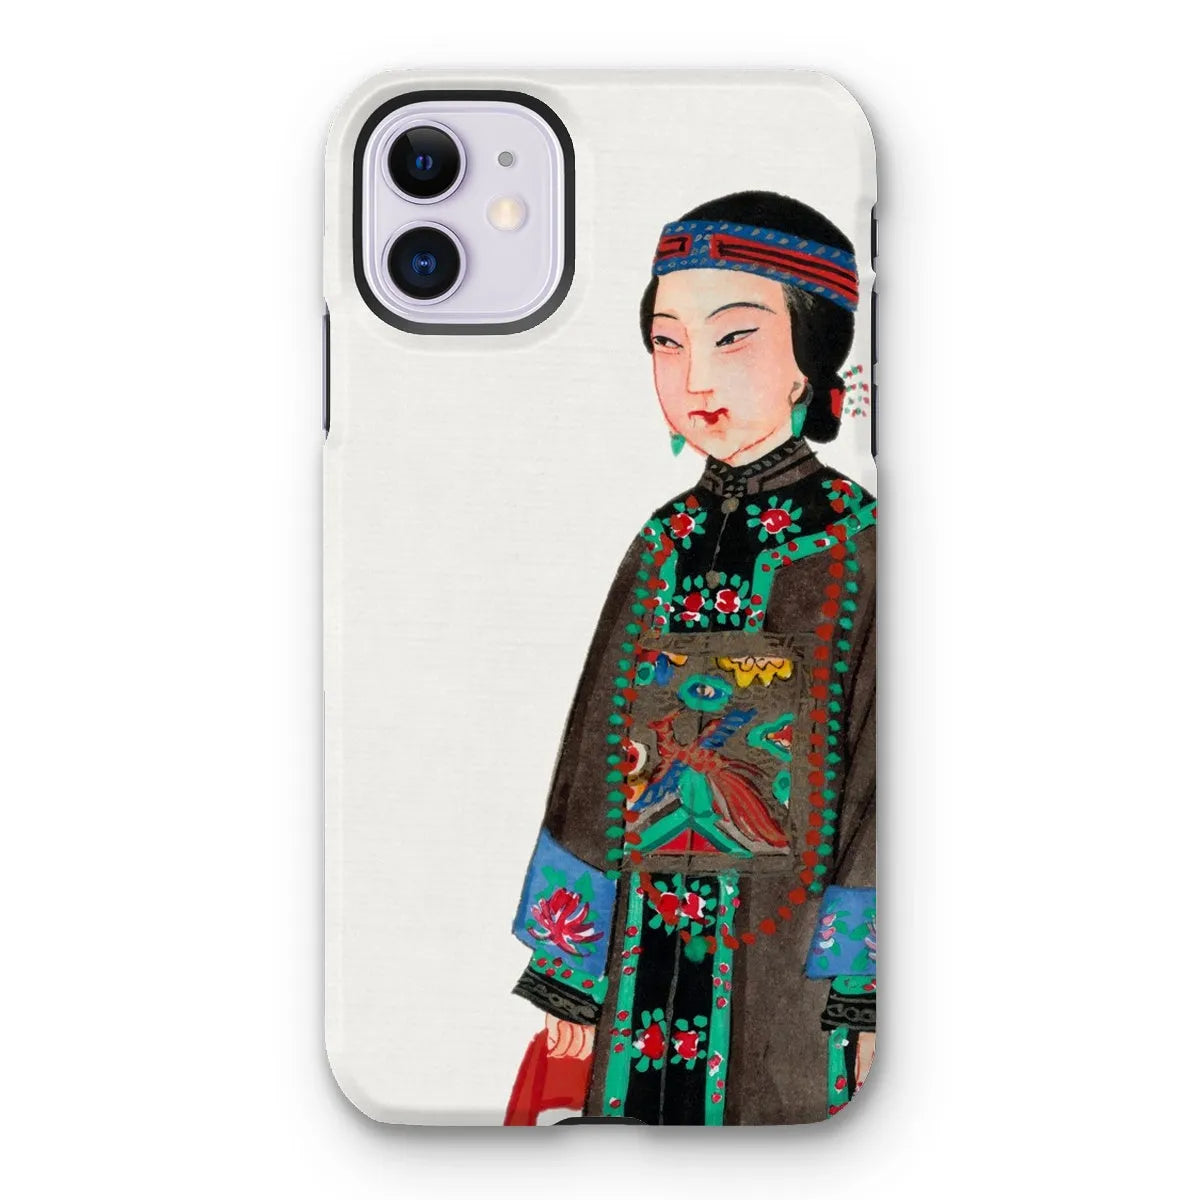 Noblewoman At Court - Chinese Aesthetic Art Phone Case - Iphone 11 / Matte - Mobile Phone Cases - Aesthetic Art